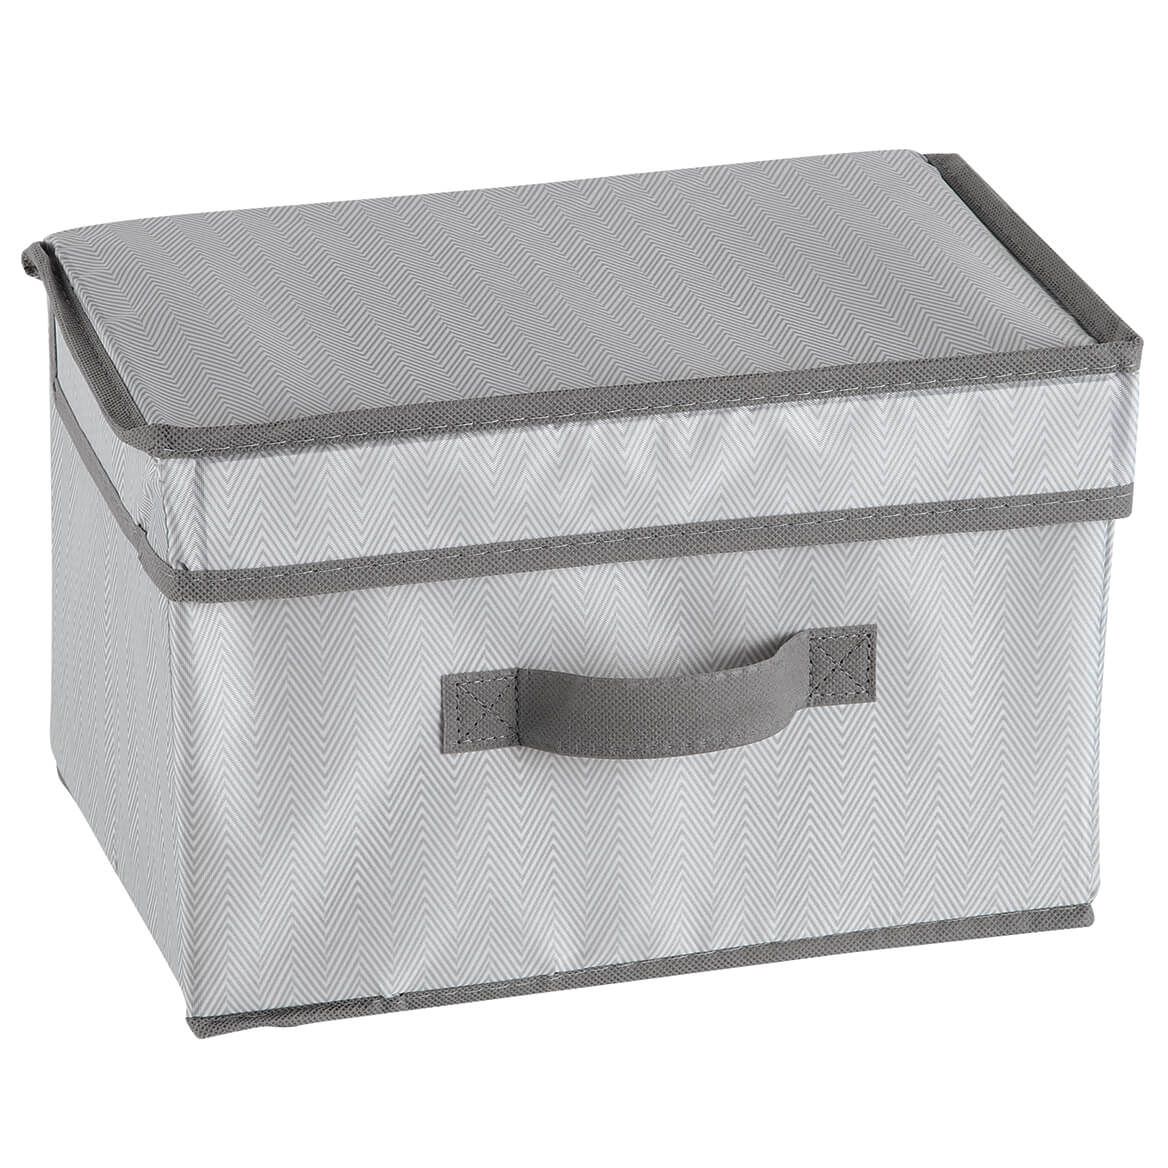 Collapsible Storage Cube with Lid - Storage Bins - Miles Kimball